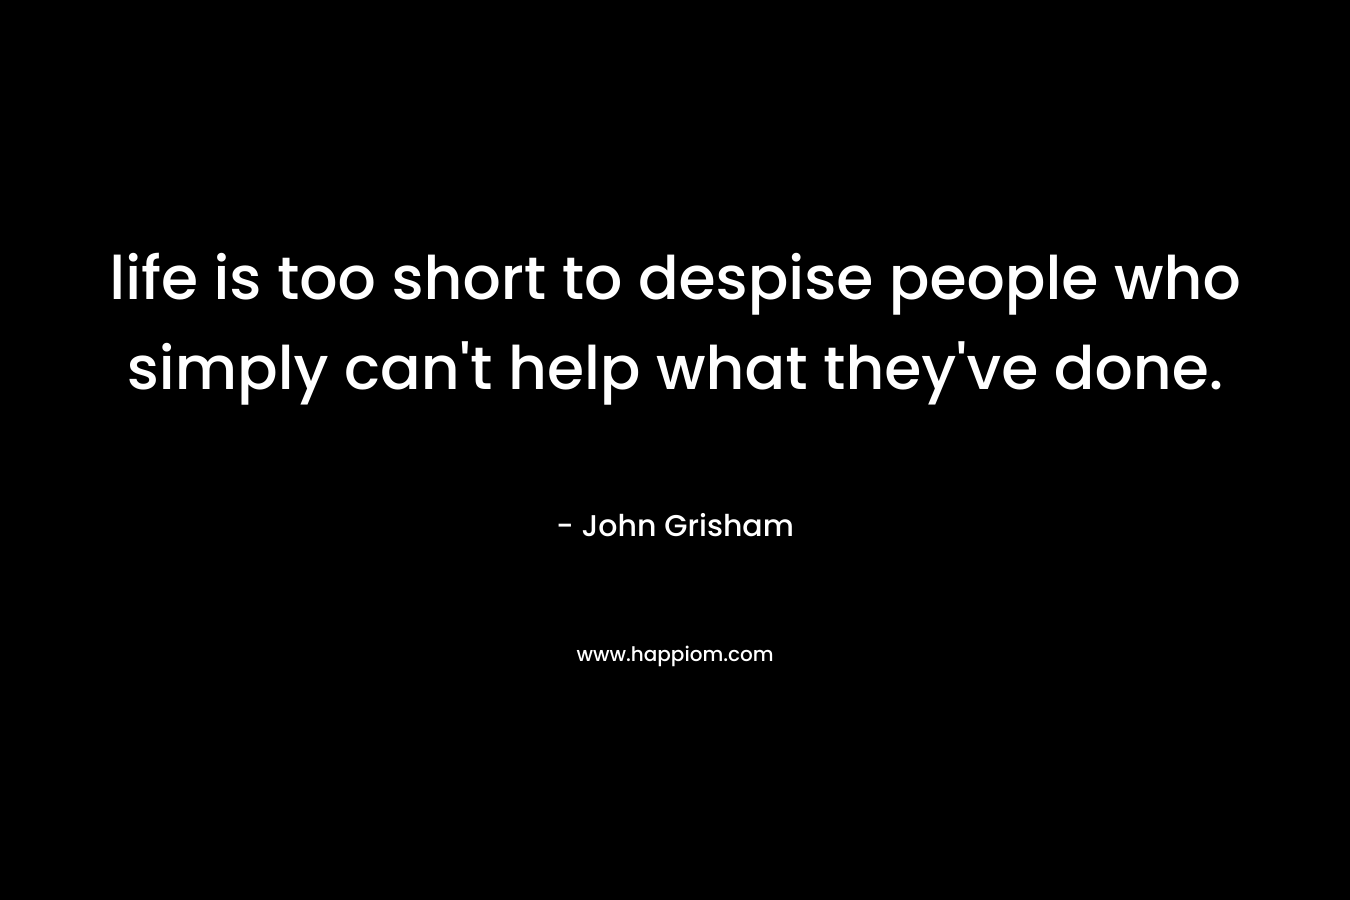 life is too short to despise people who simply can’t help what they’ve done. – John Grisham